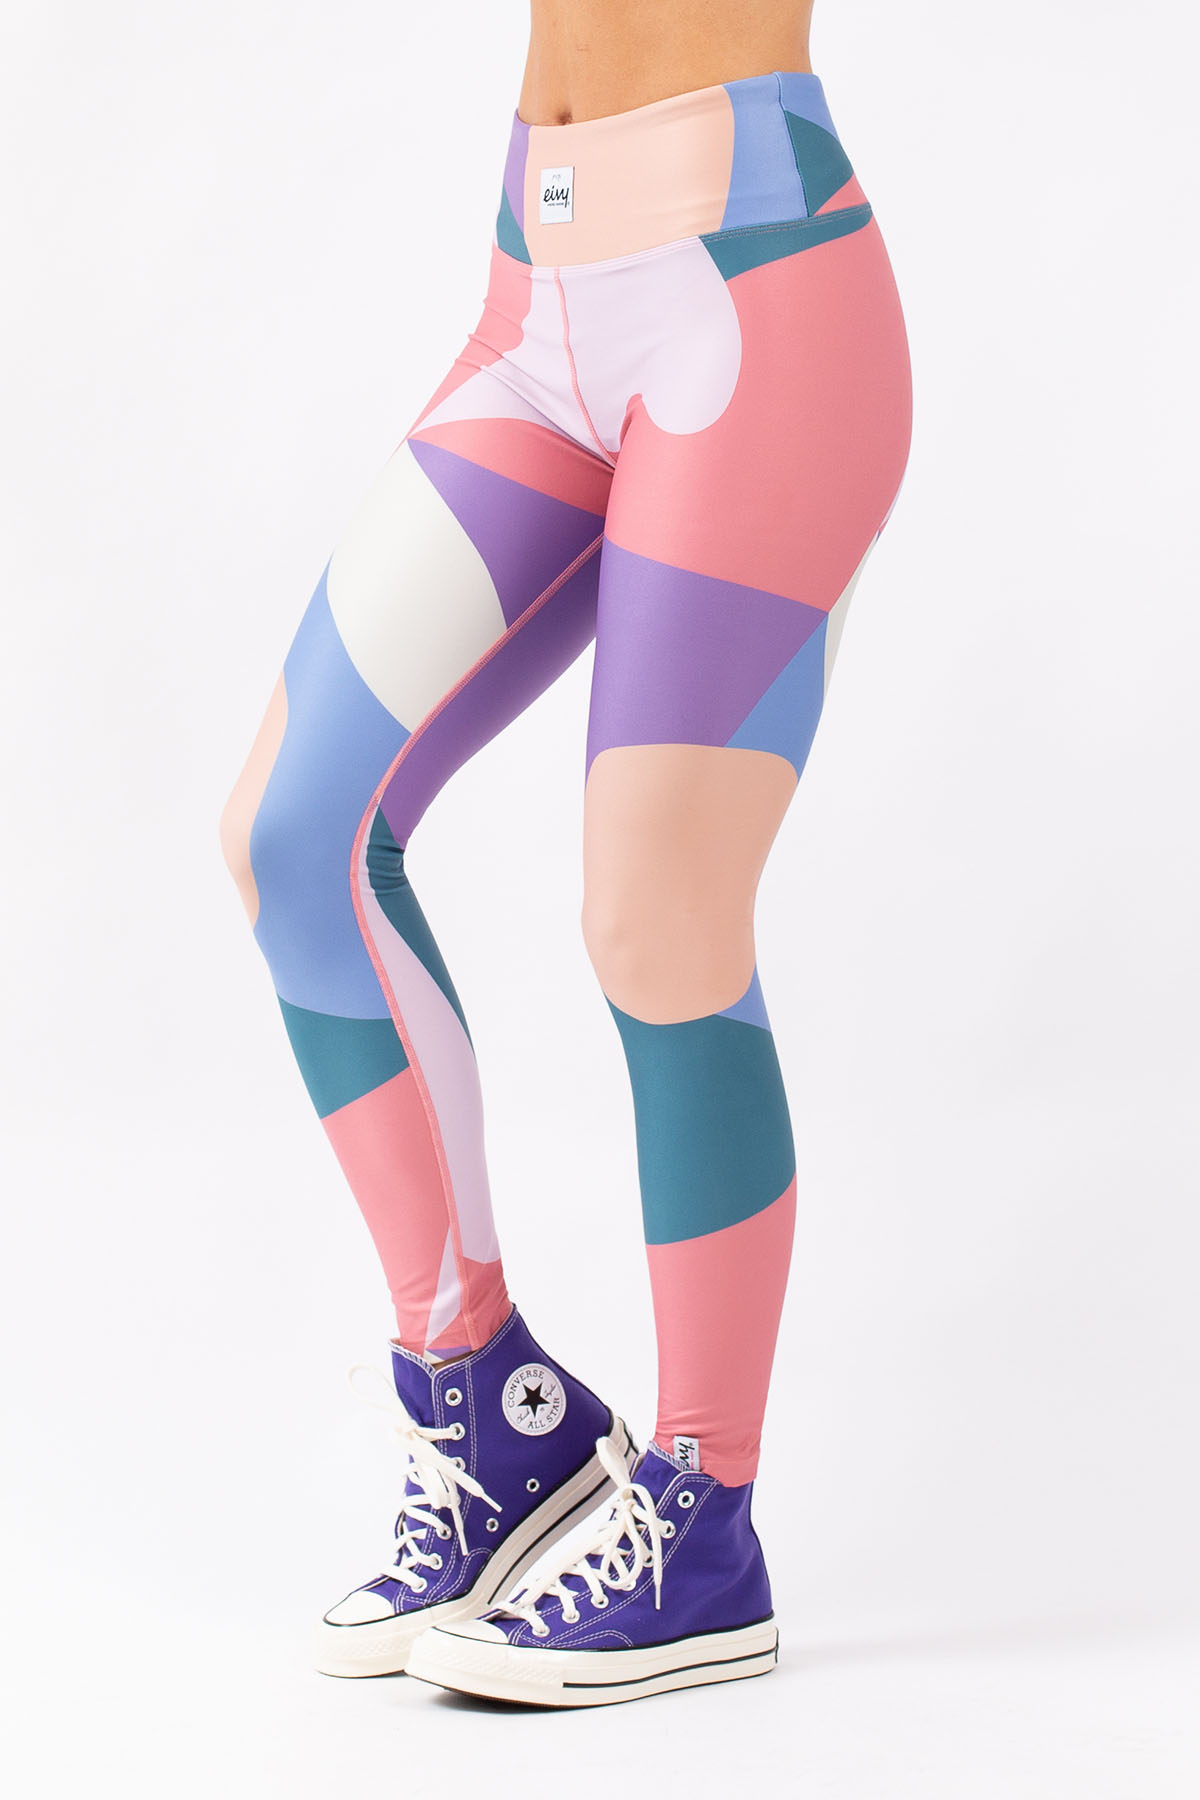 Icecold Tights - Abstract Shapes | XXL